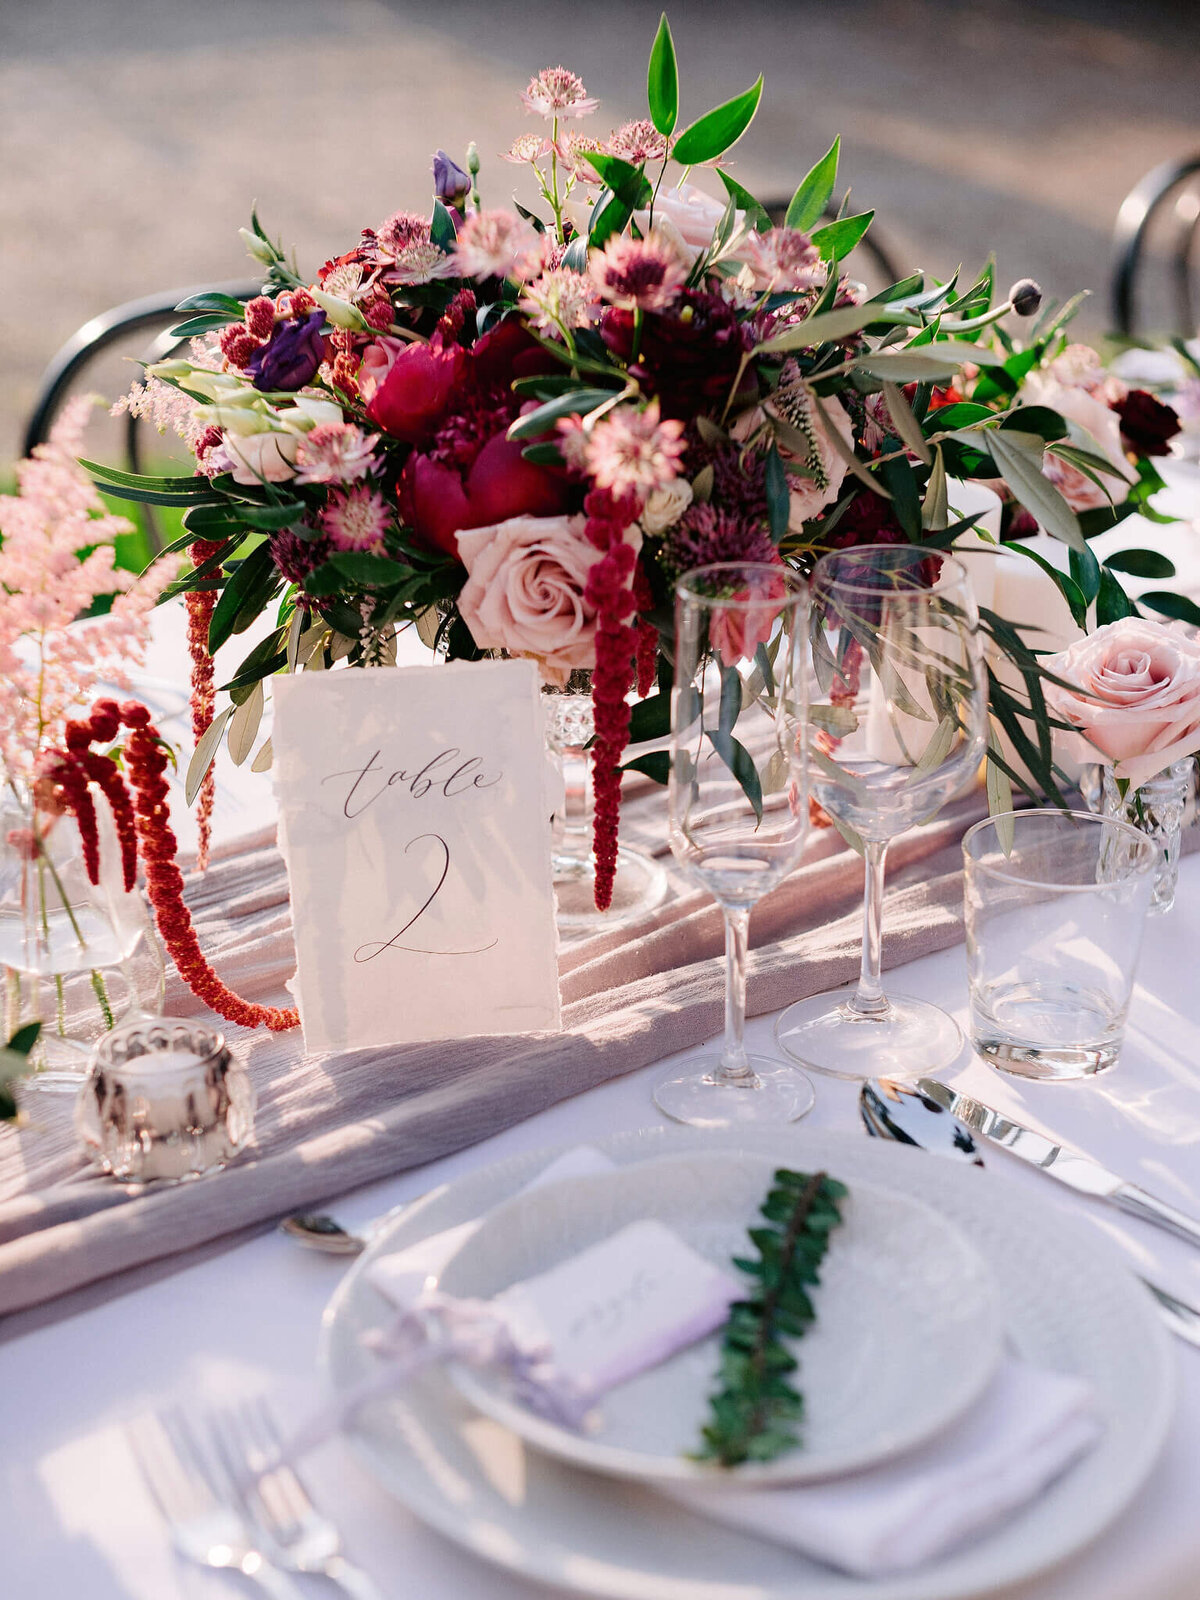 The flower bouquet centerpiece, wine glasses and plates are on a white table, with a sign that reads, "table 2".